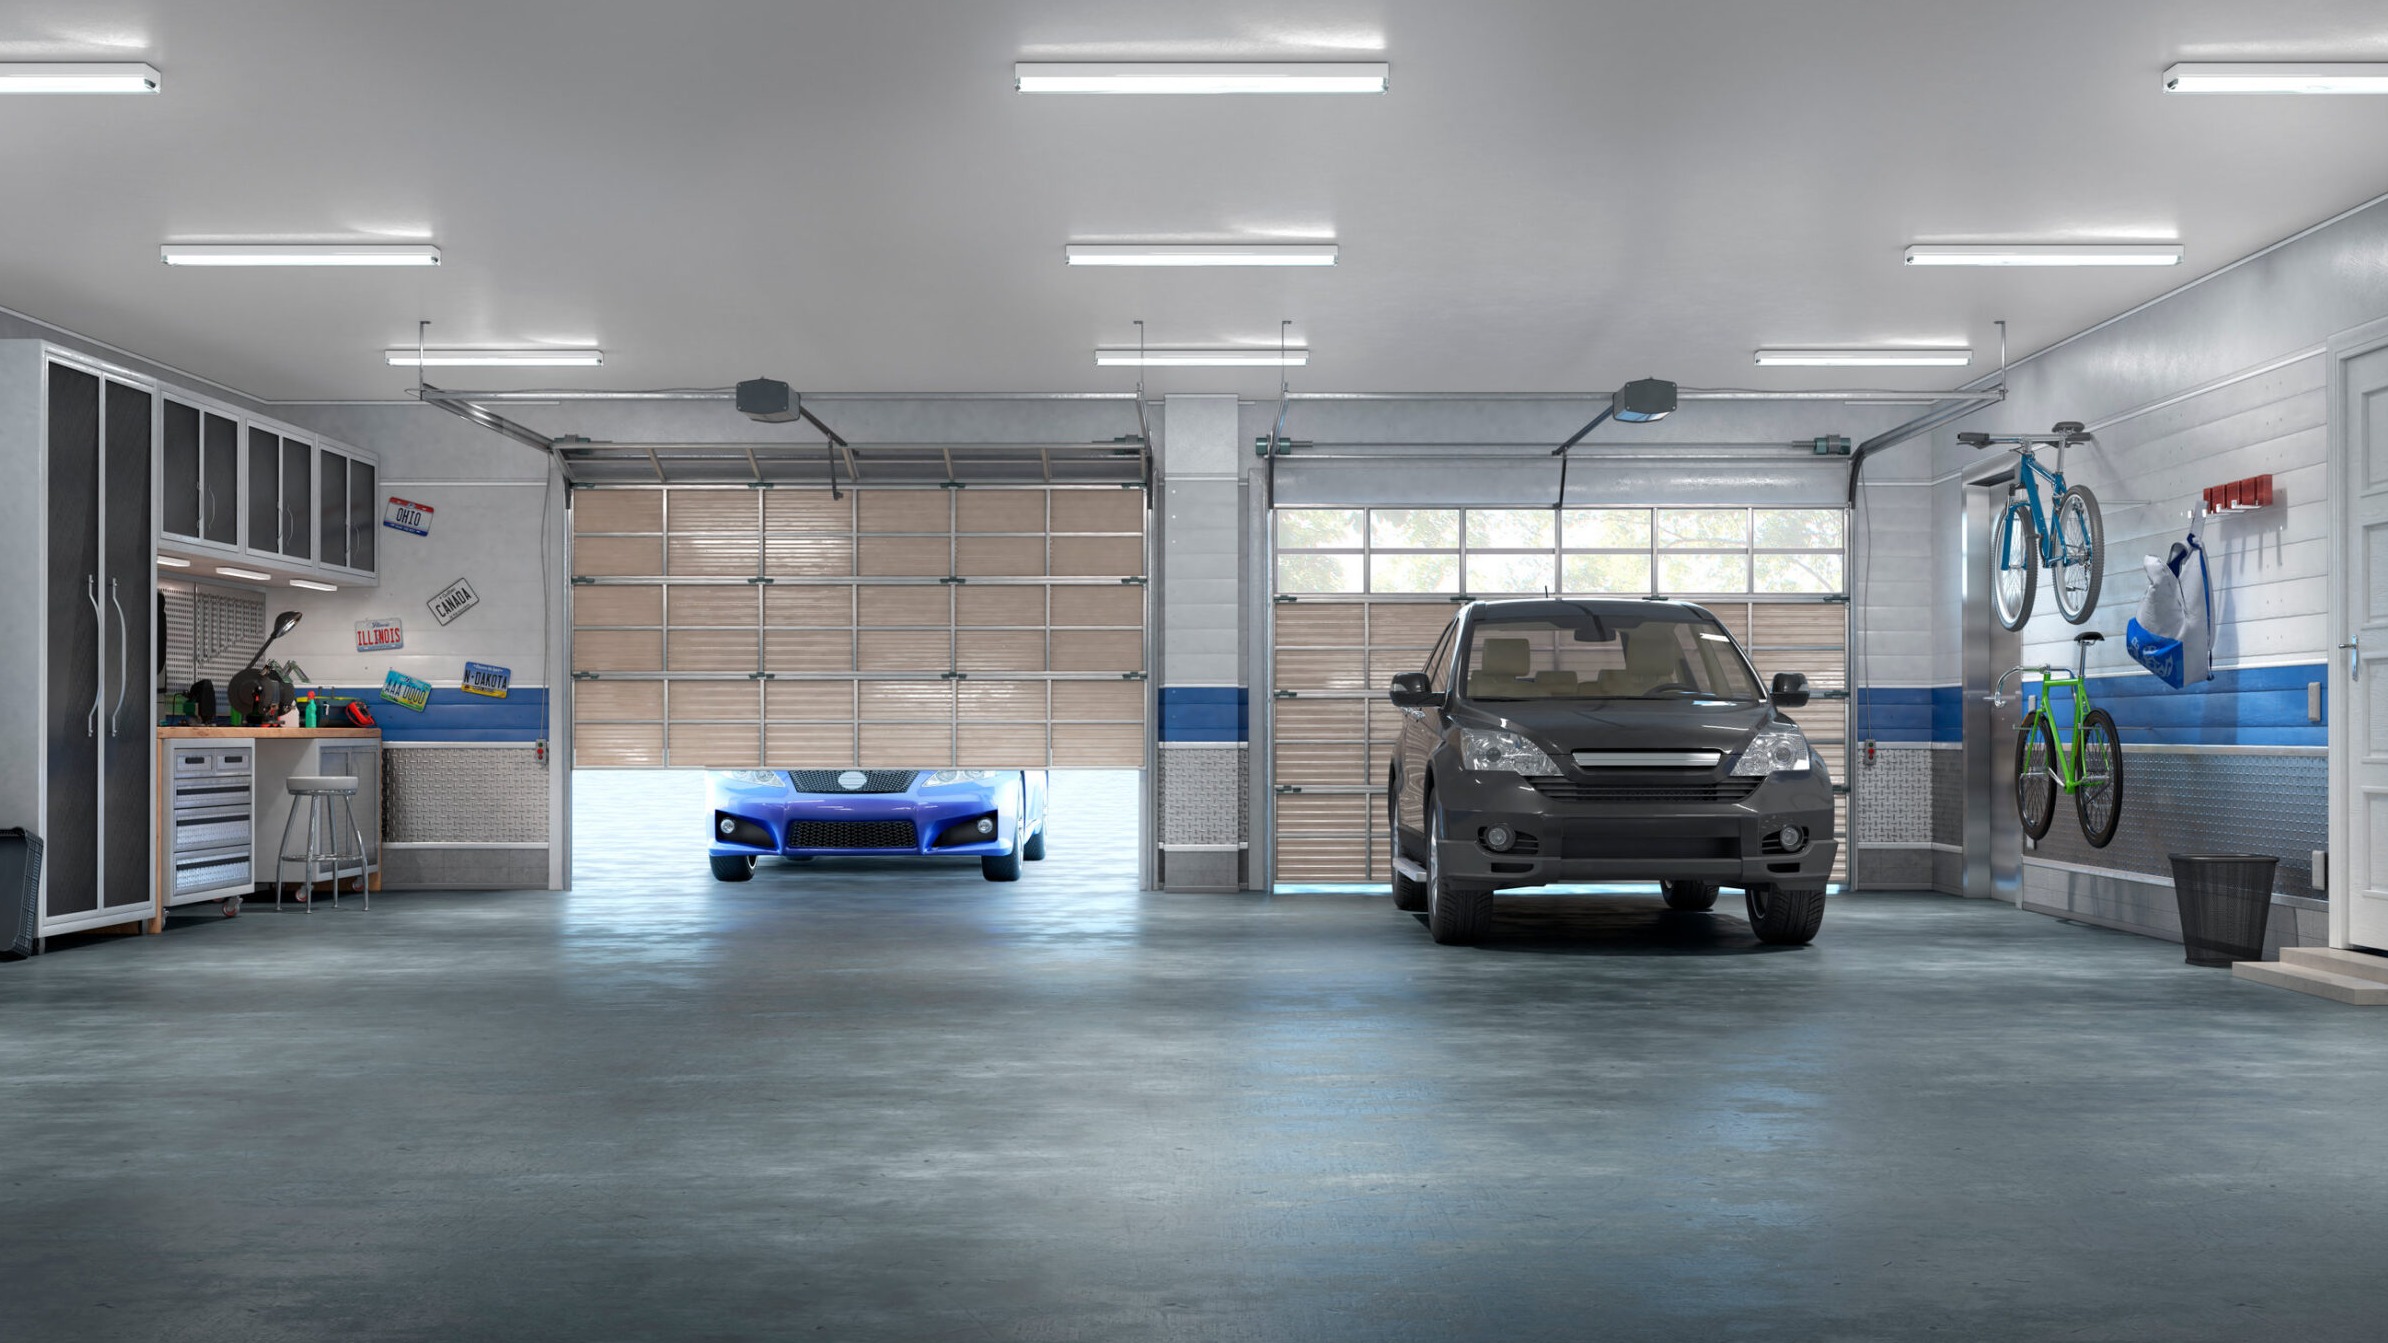 How To Choose The Garage Light?